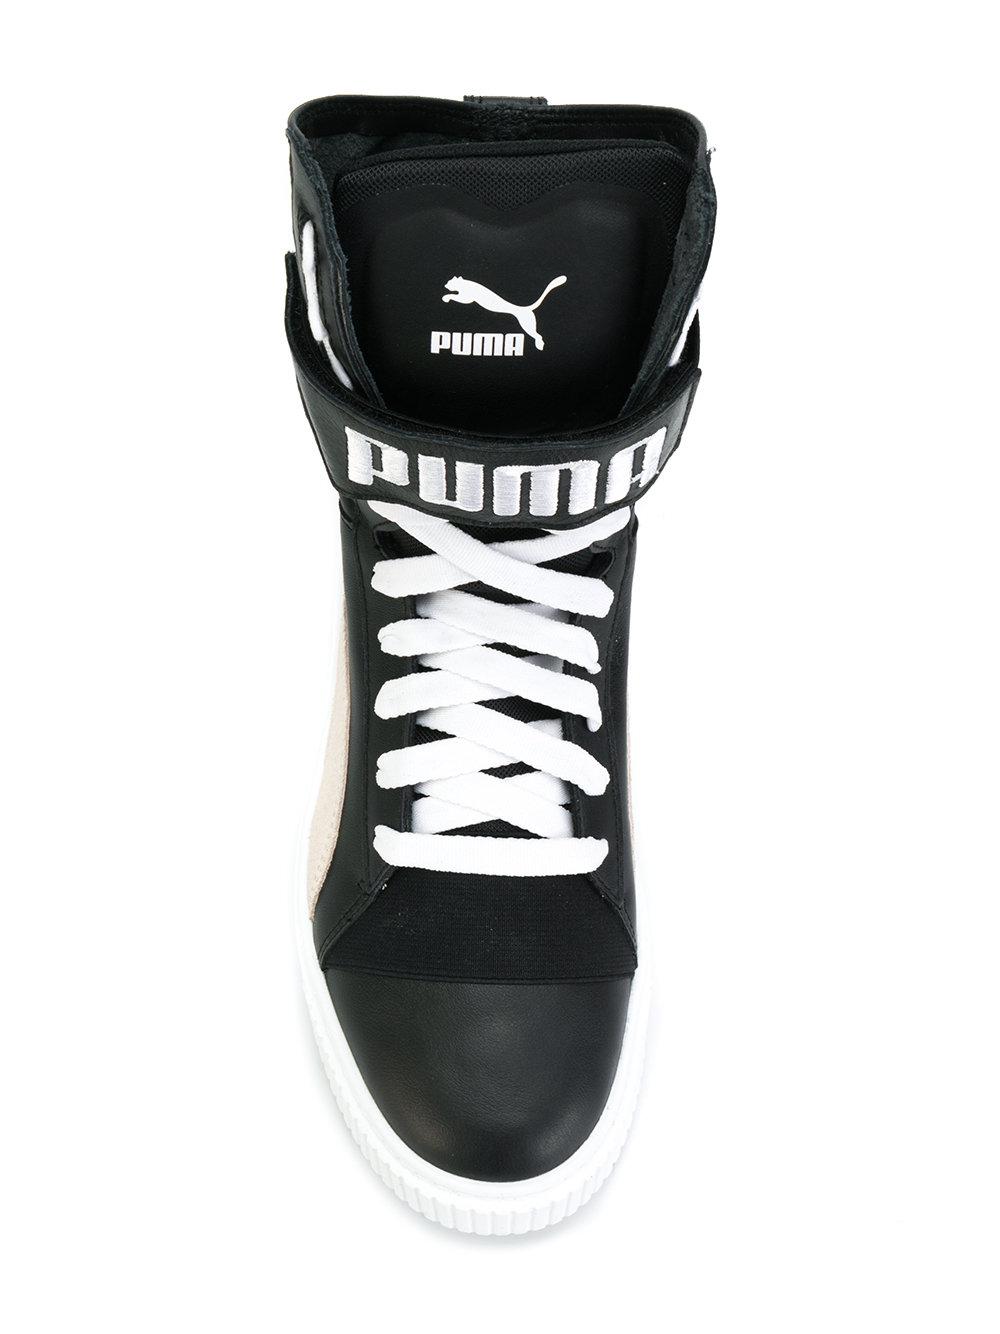 PUMA Rubber Lace-up Hi-top Sneakers in Black for Men - Lyst